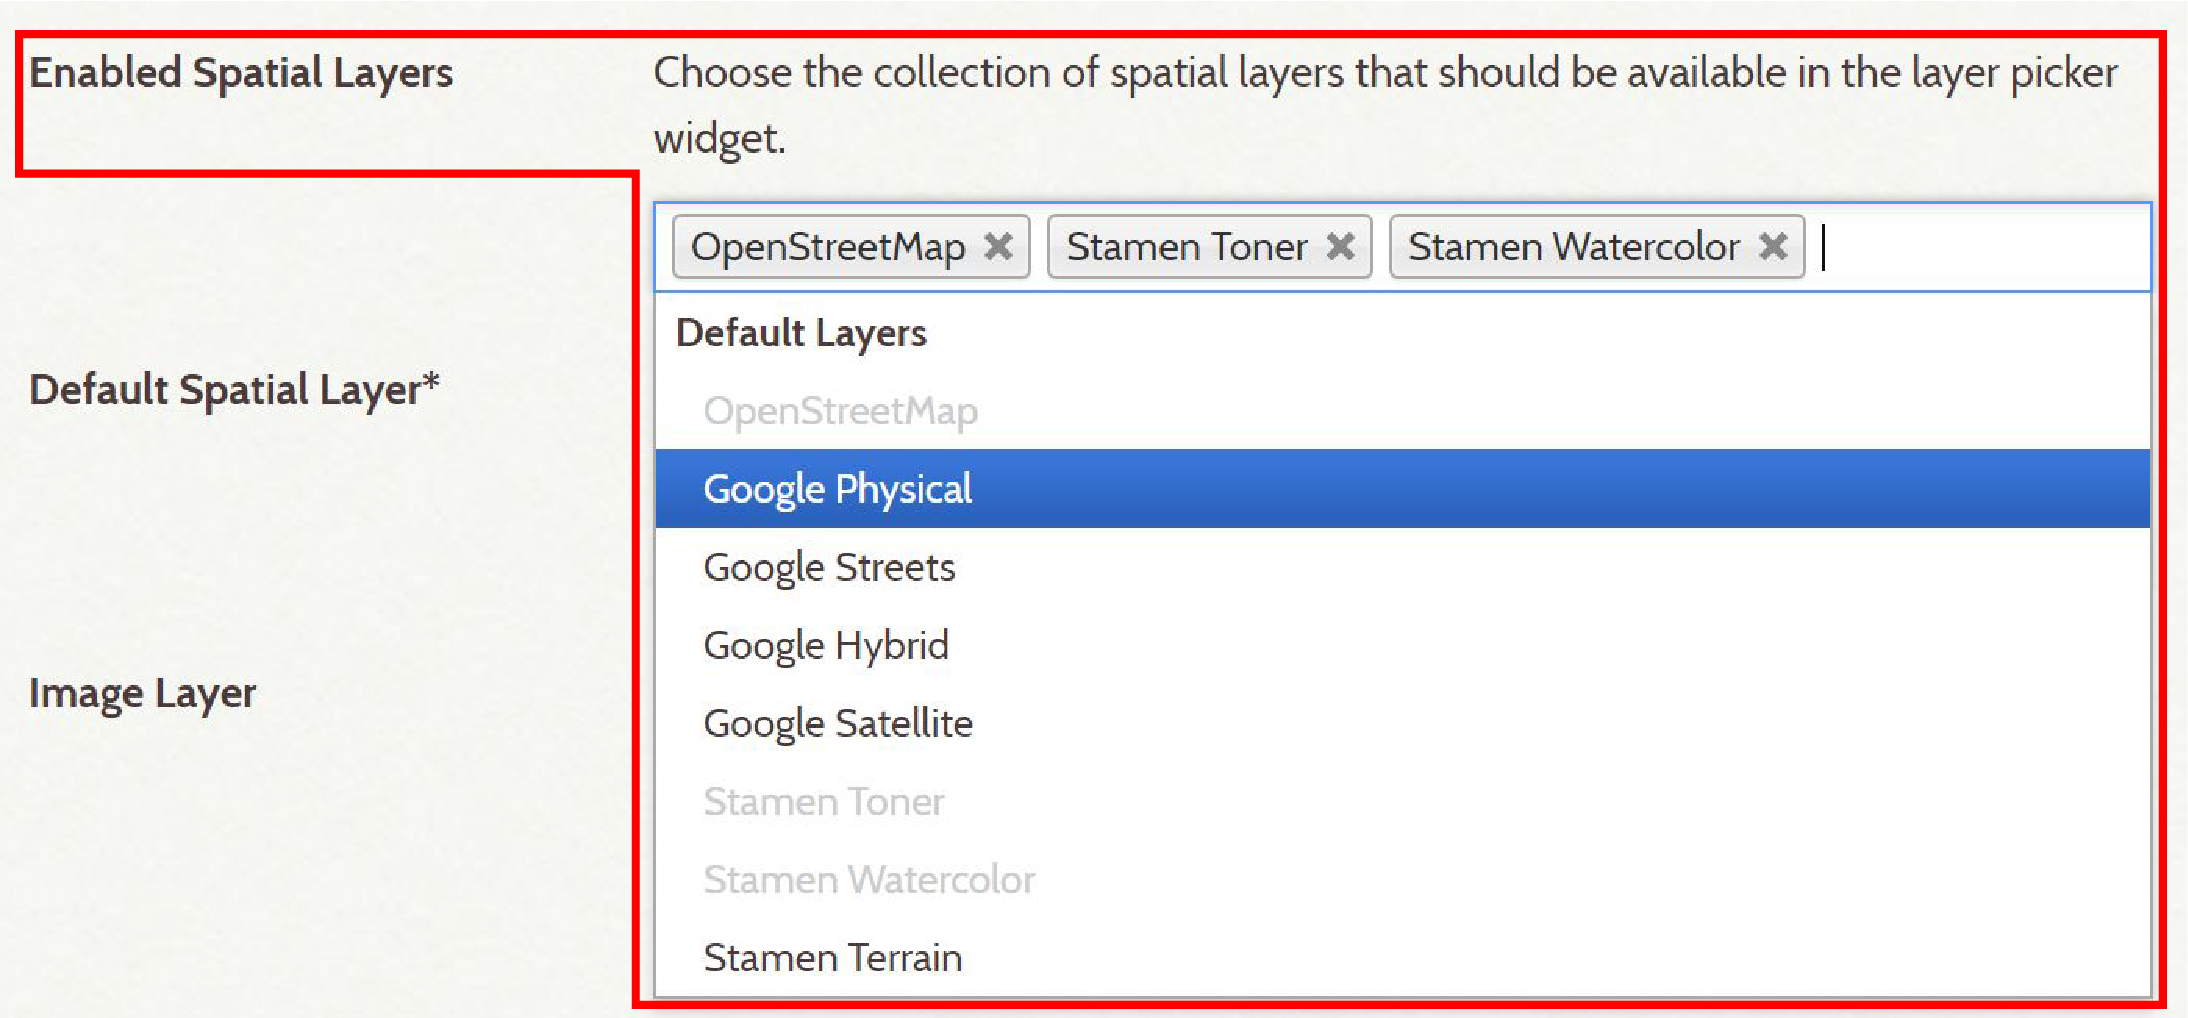 Screenshot of enabled spatial layers options